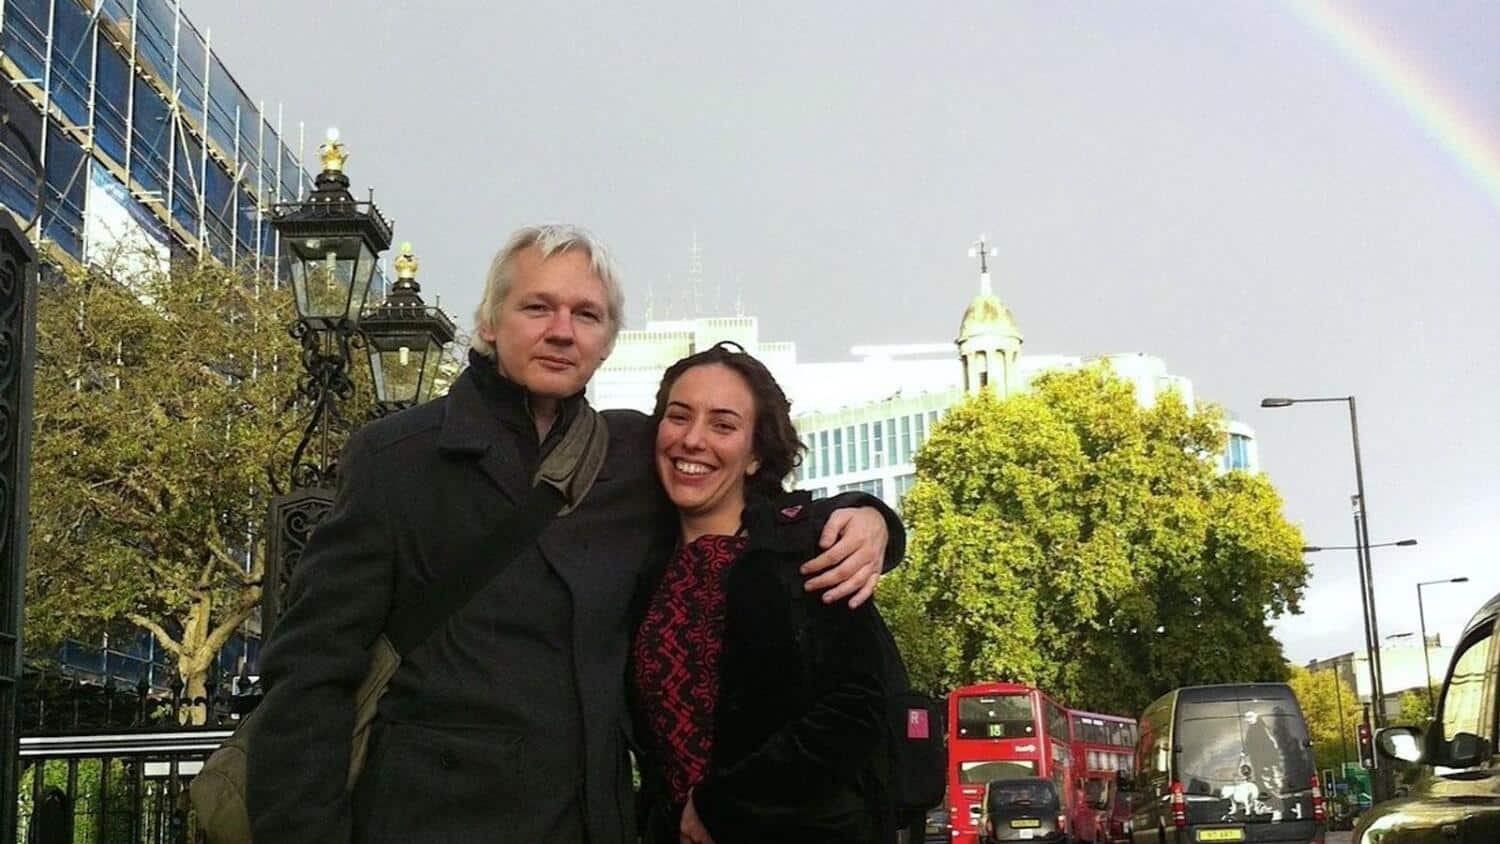 Julian Assange and Stella Moris Get Permission to Marry in Prison